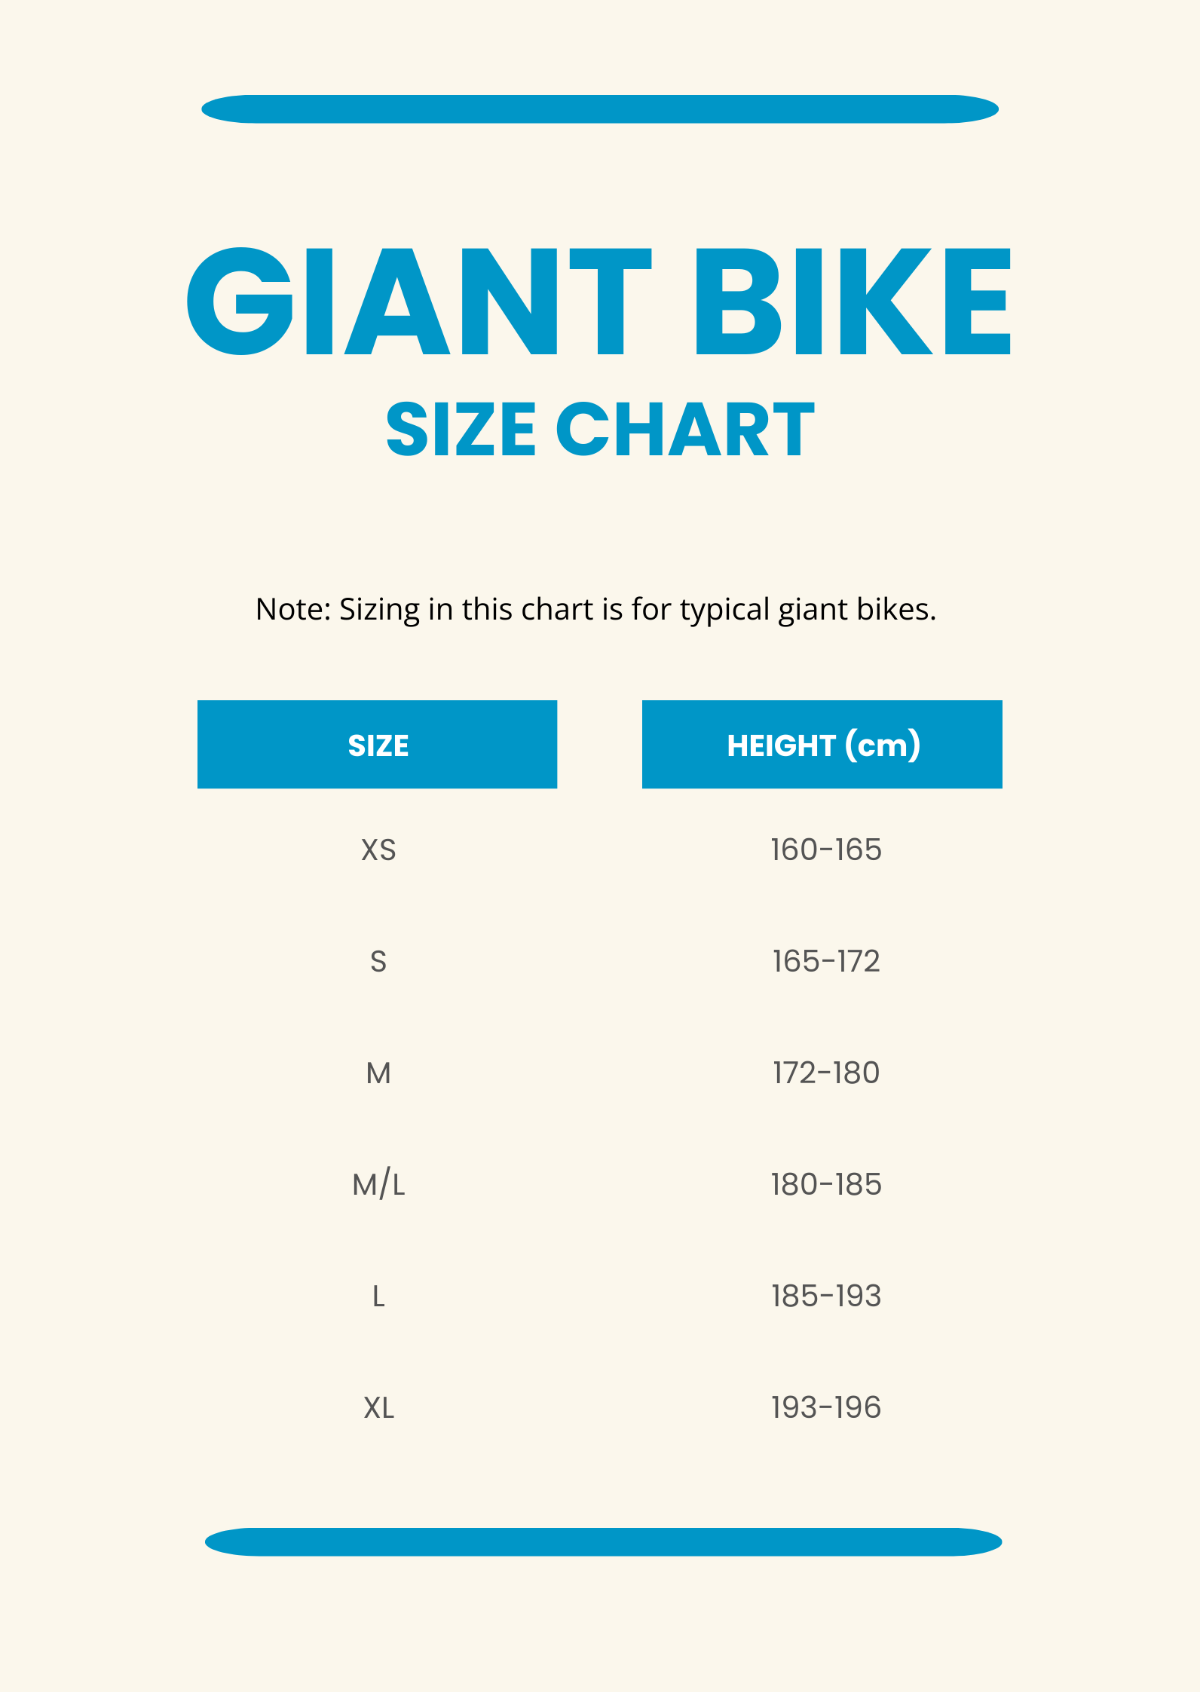 Giant Bike Size Chart Template - Edit Online & Download Example ...